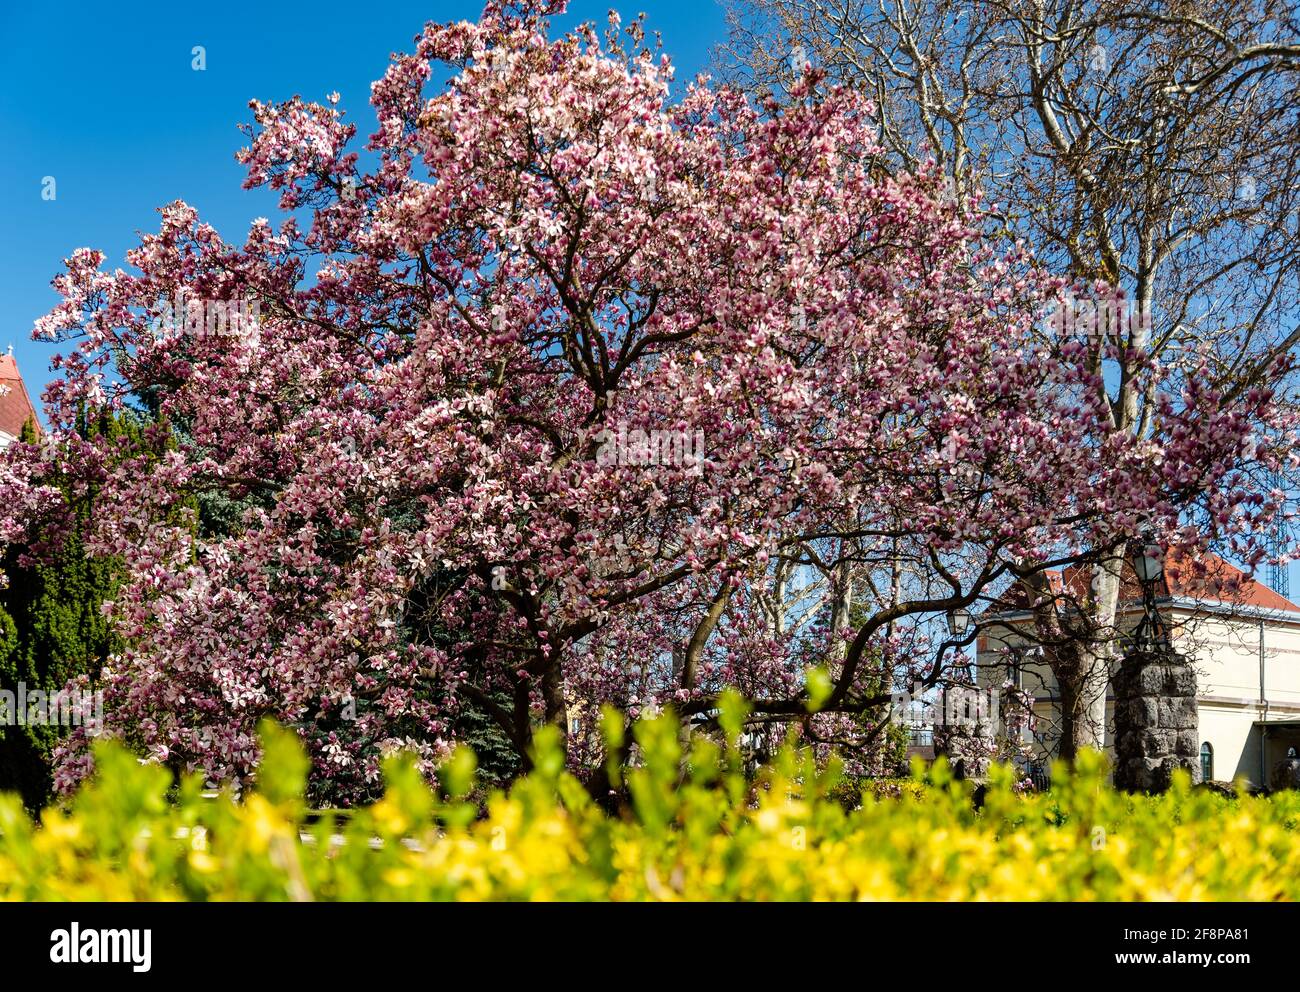 Splendid blooming lily tree in Pecs Hungary This amazing giant tree blooming in early springtrime. Pecs is a beautiful city in Hungary Stock Photo